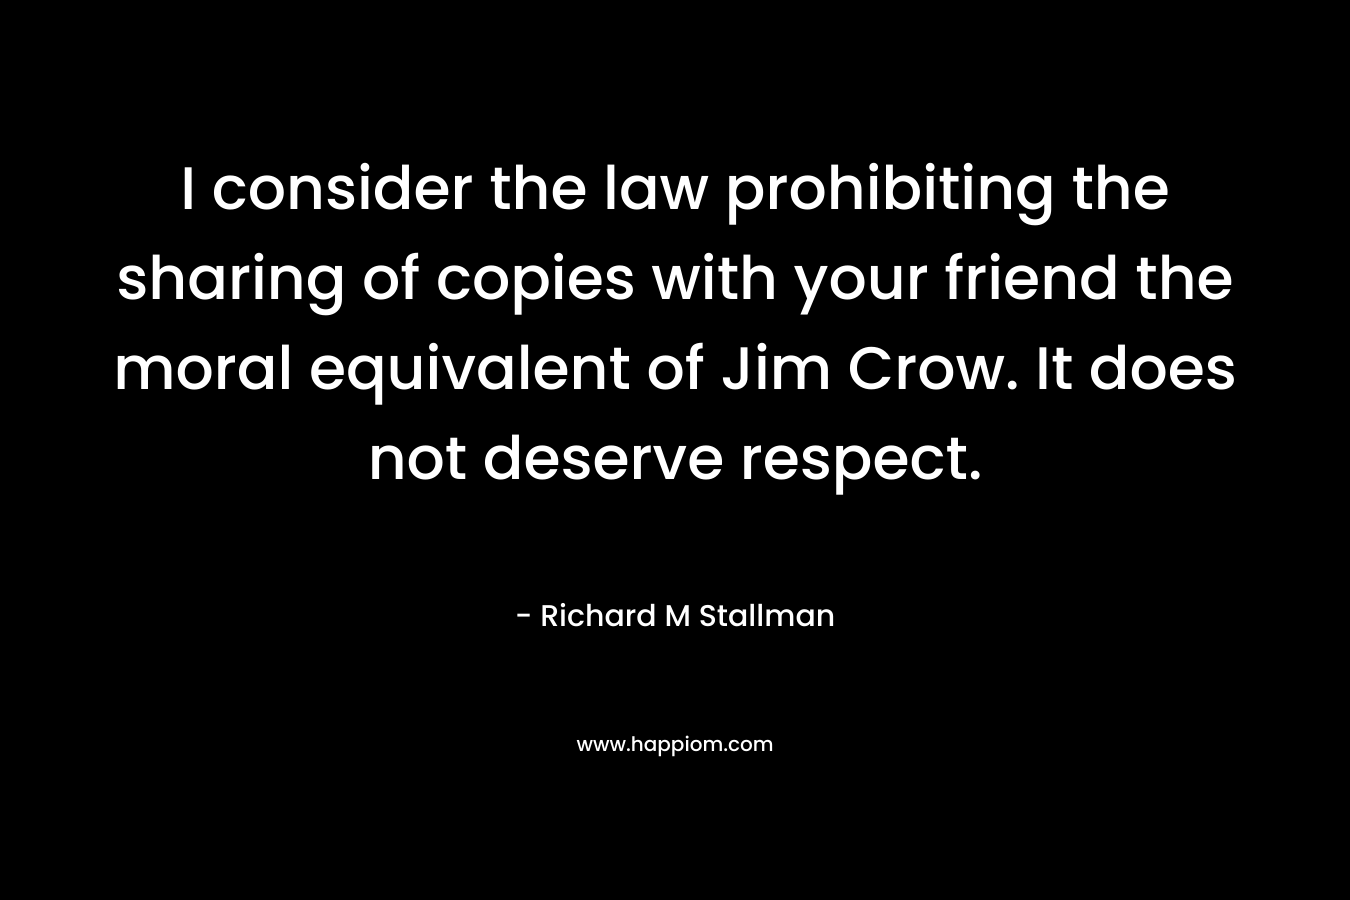 I consider the law prohibiting the sharing of copies with your friend the moral equivalent of Jim Crow. It does not deserve respect.